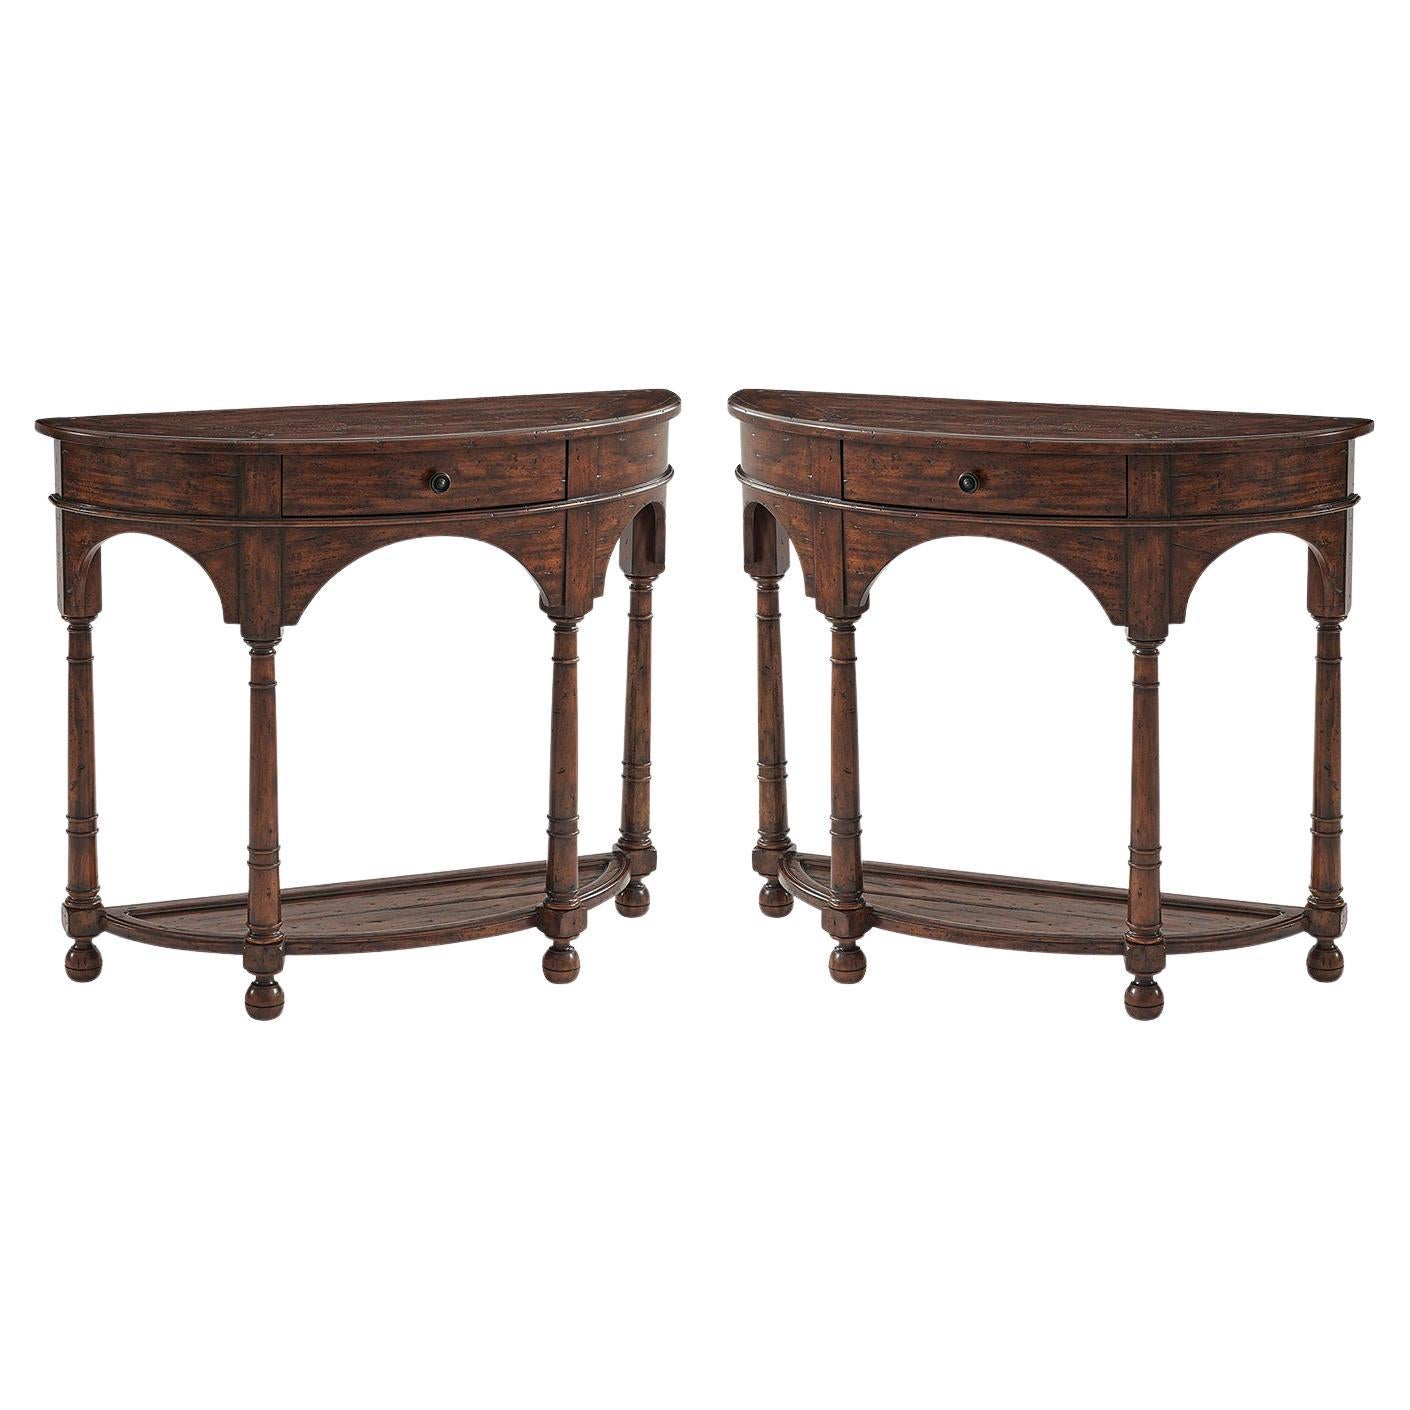 An Italian Provincial antiqued wood bowfront console table, the bowed frieze drawer above arched aprons, turned supports and feet, joined by an under tier. 

Dimensions: 44